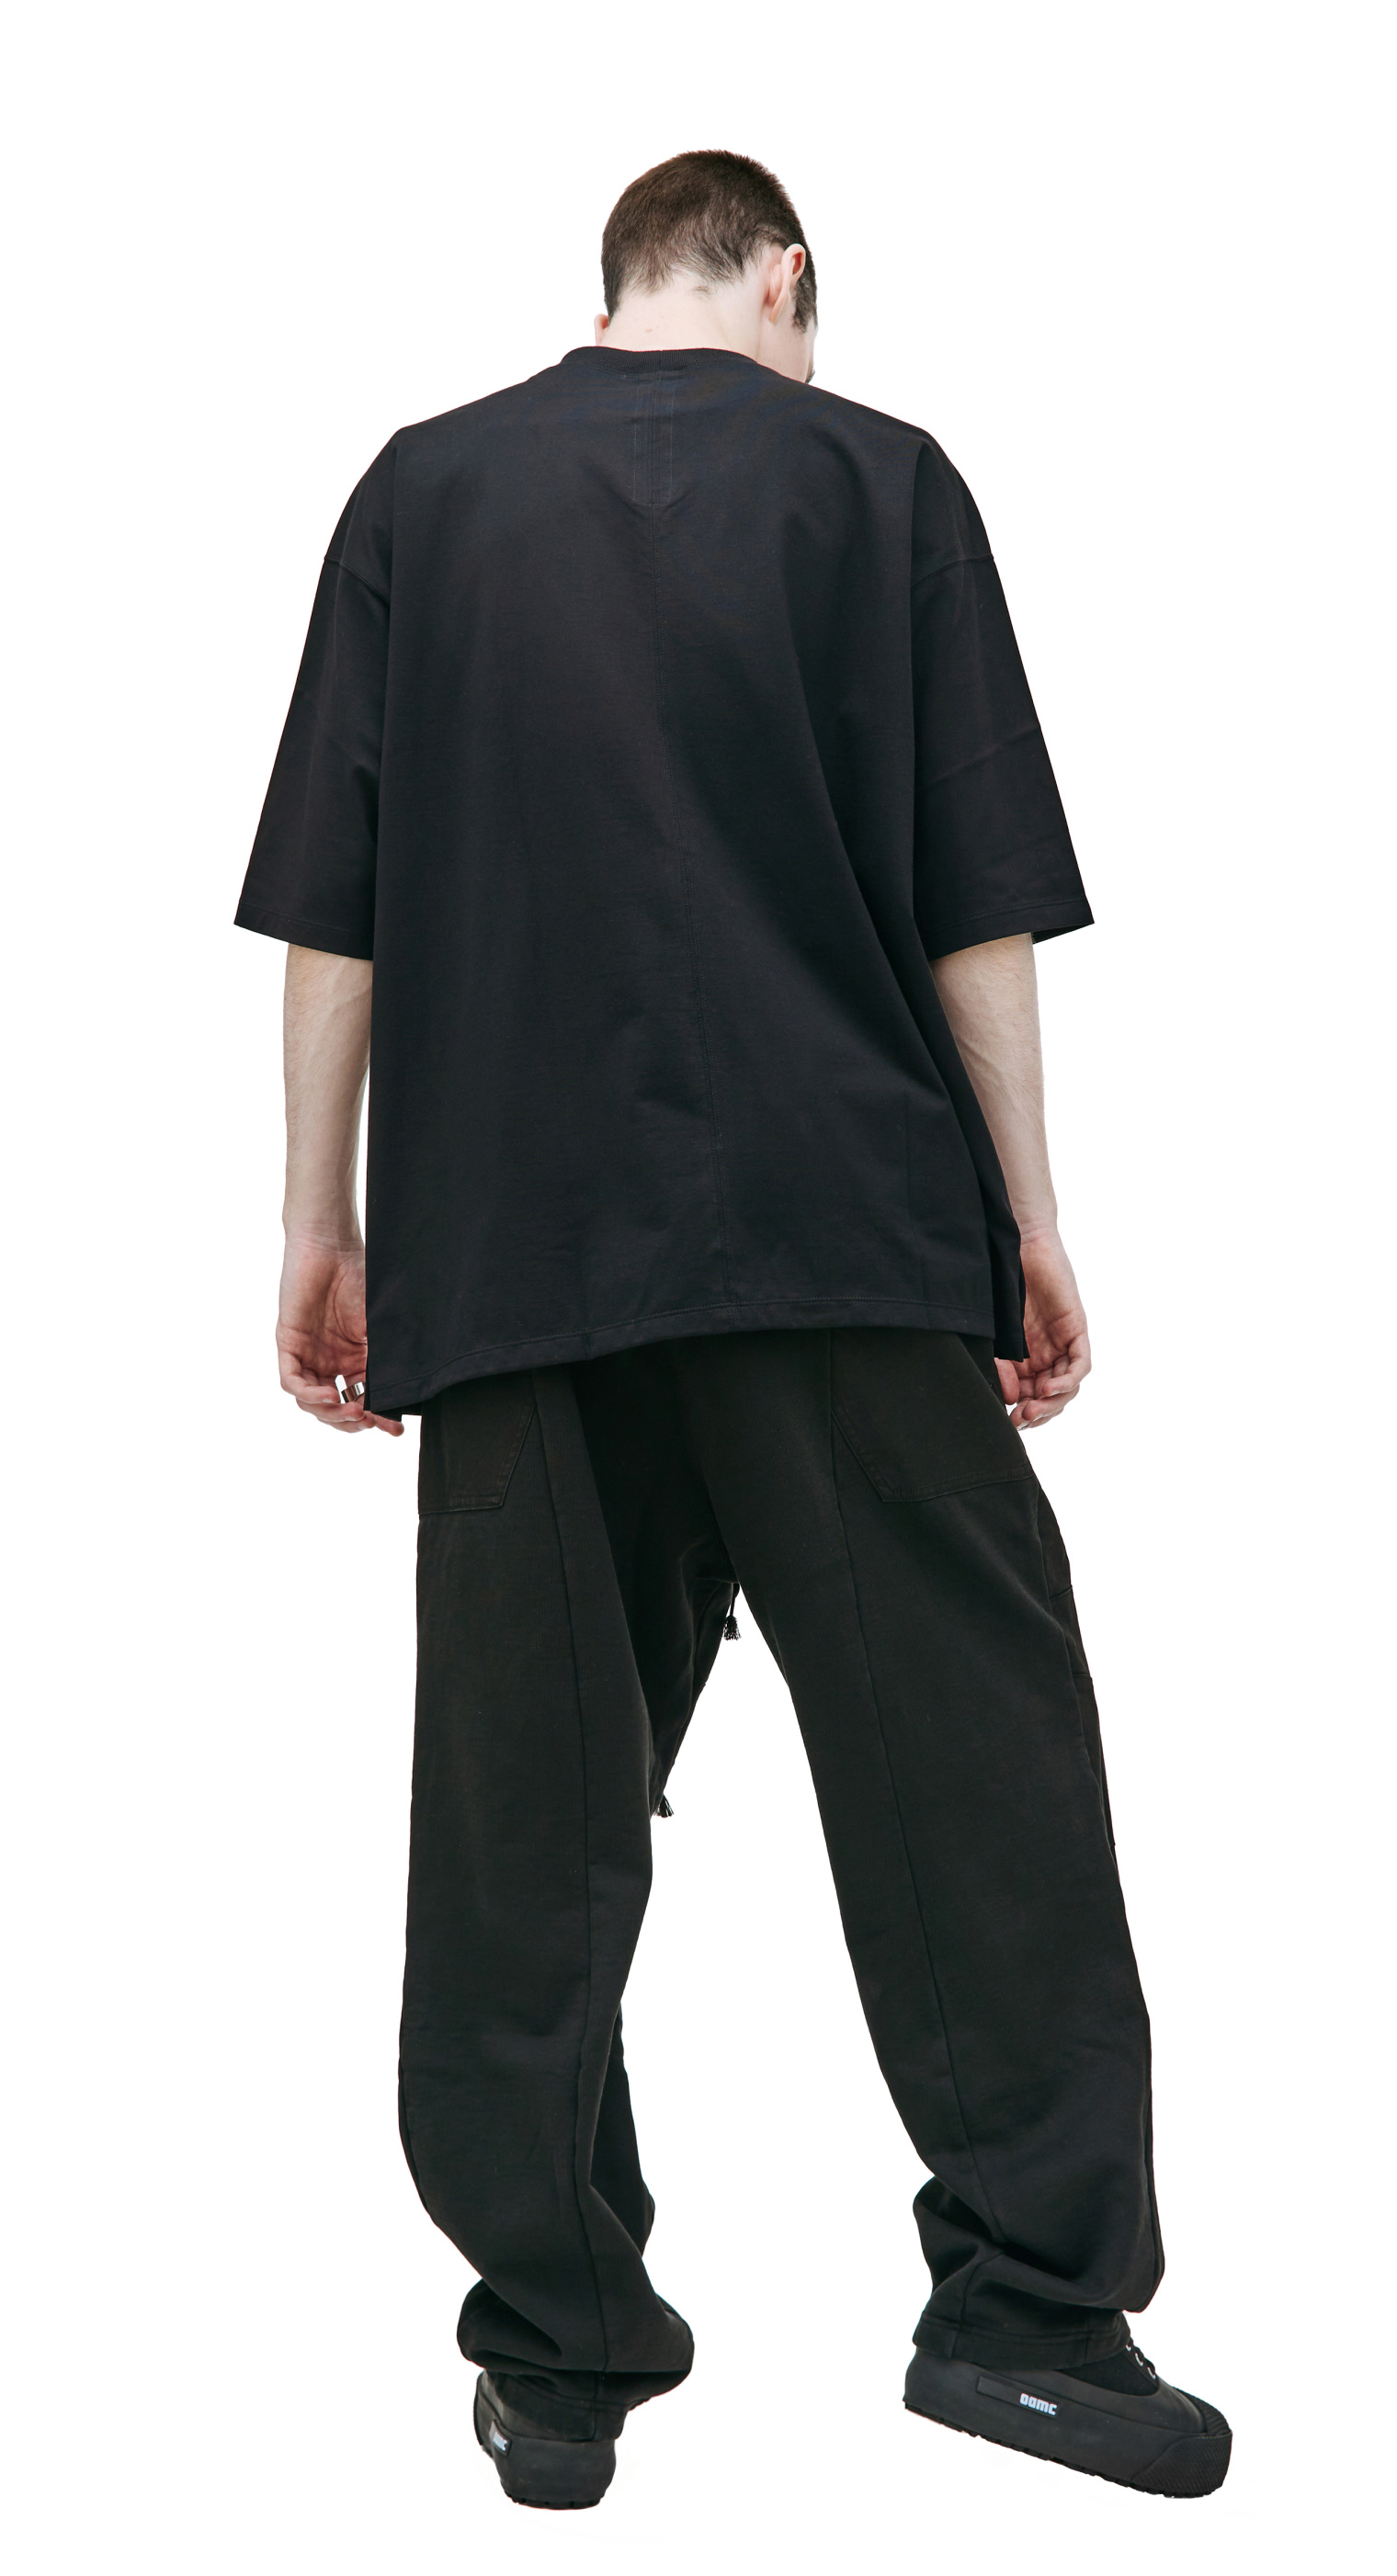 The Viridi-Anne Oversized t-shirt with pockets